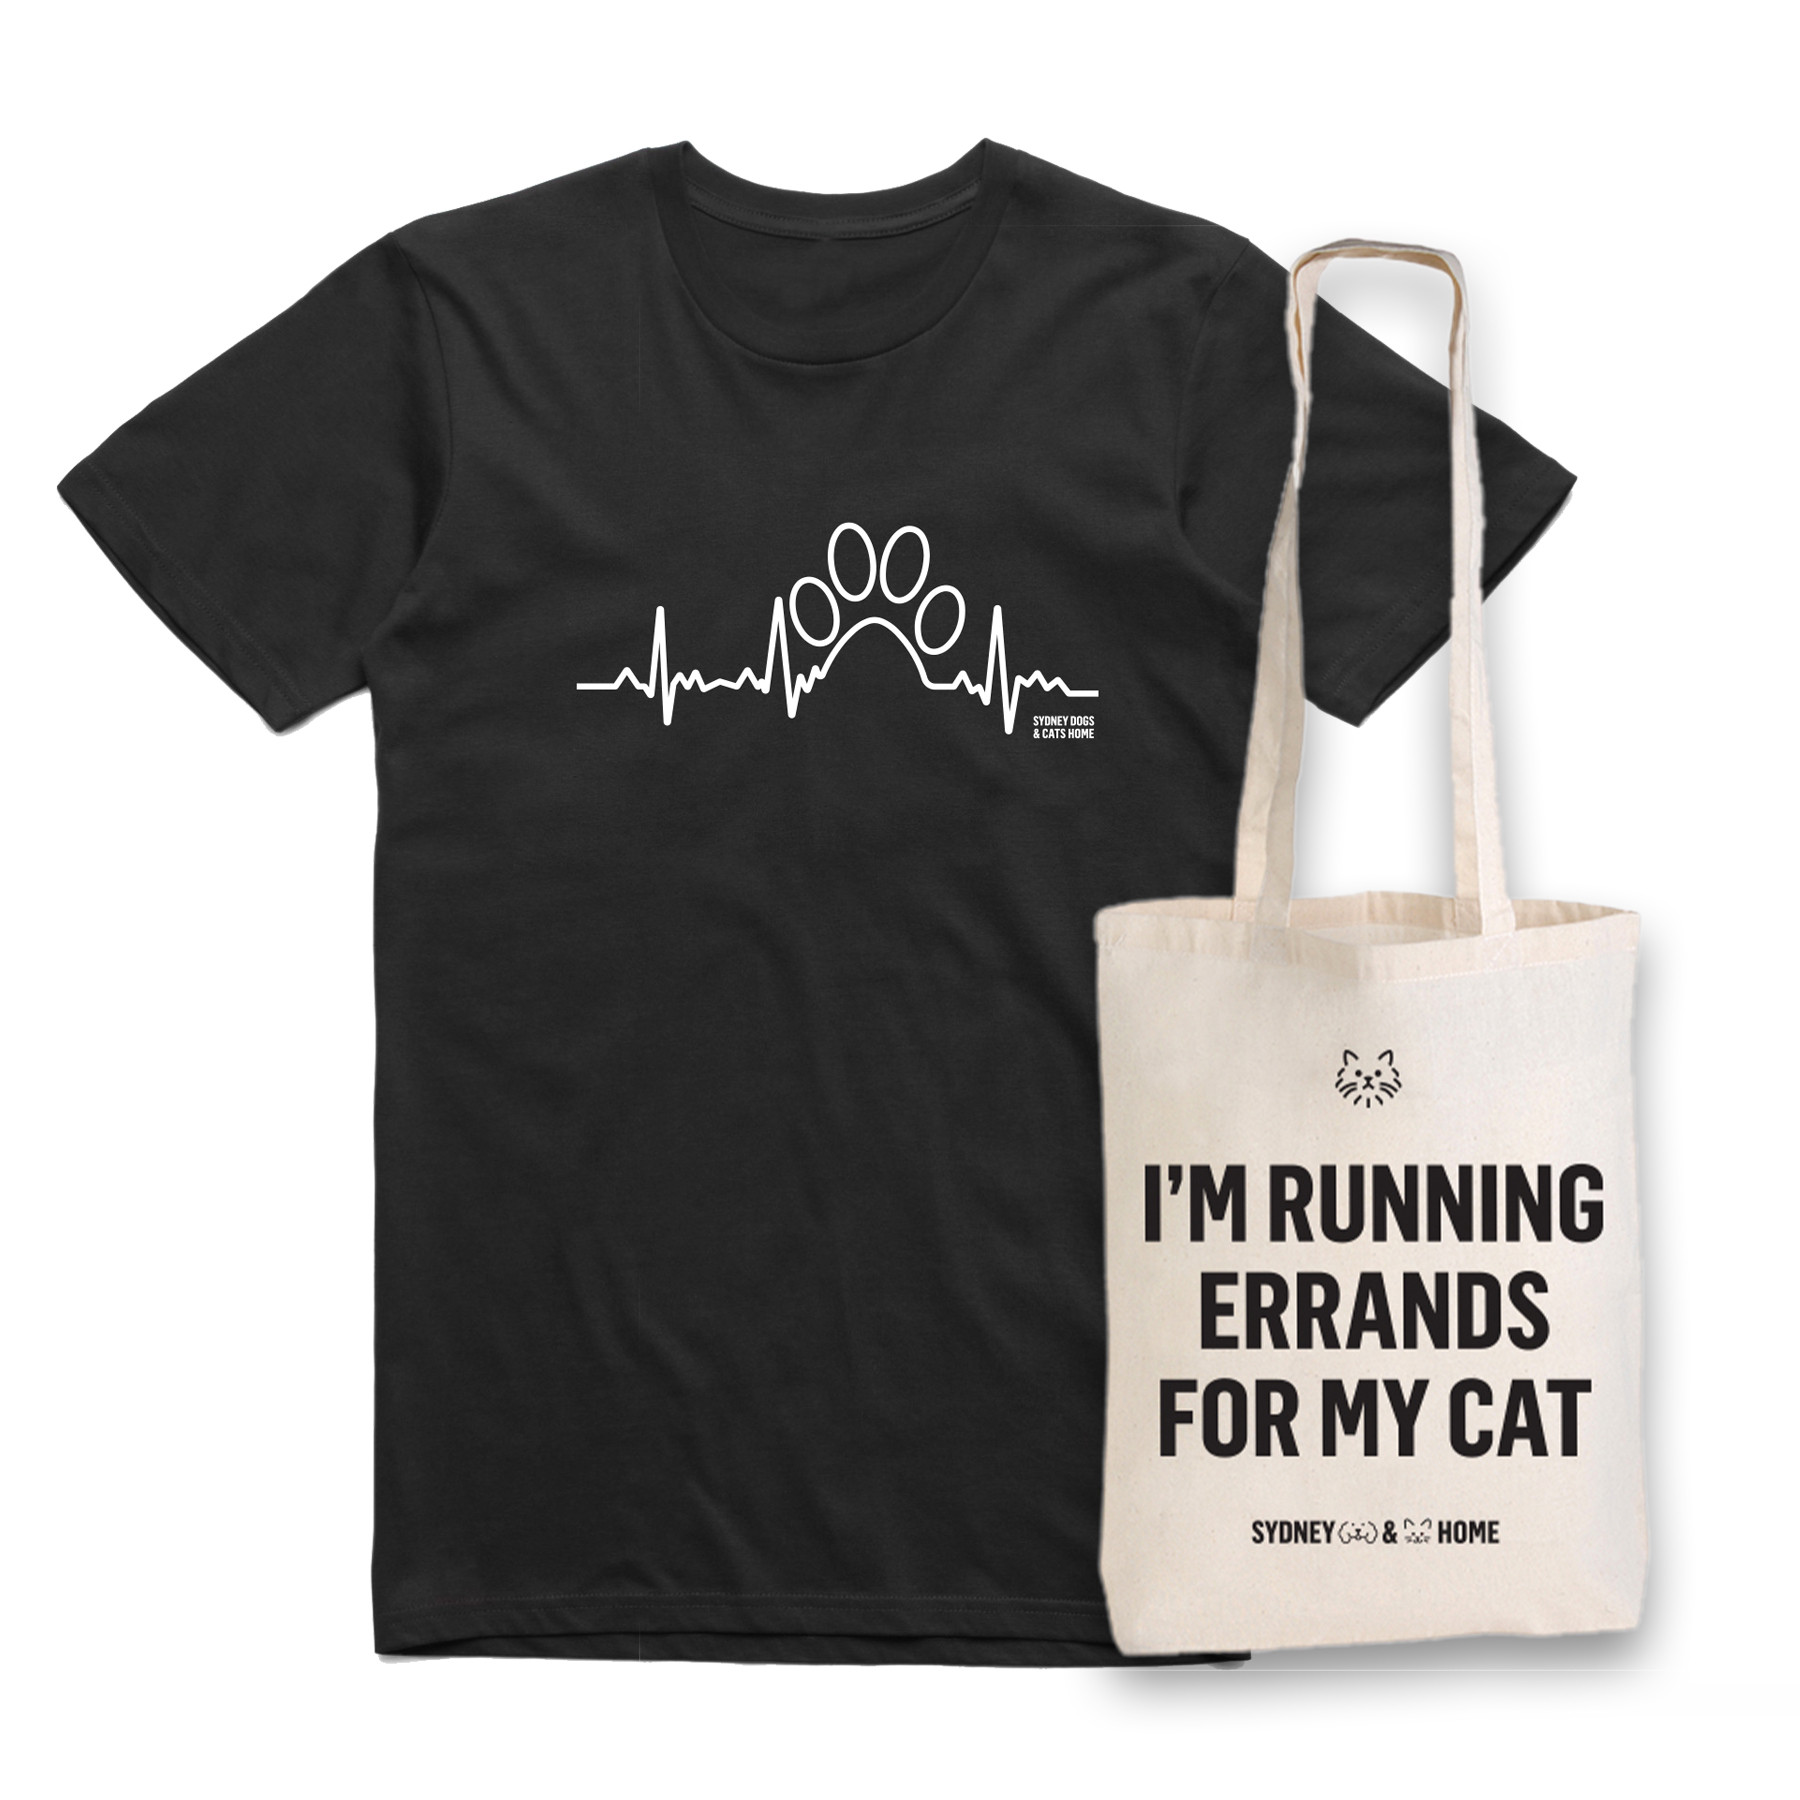 SYDNEY DOGS AND CATS HOME - PAW PULSE MENS TEE + ERRANDS FOR MY CAT TOTE BUNDLE